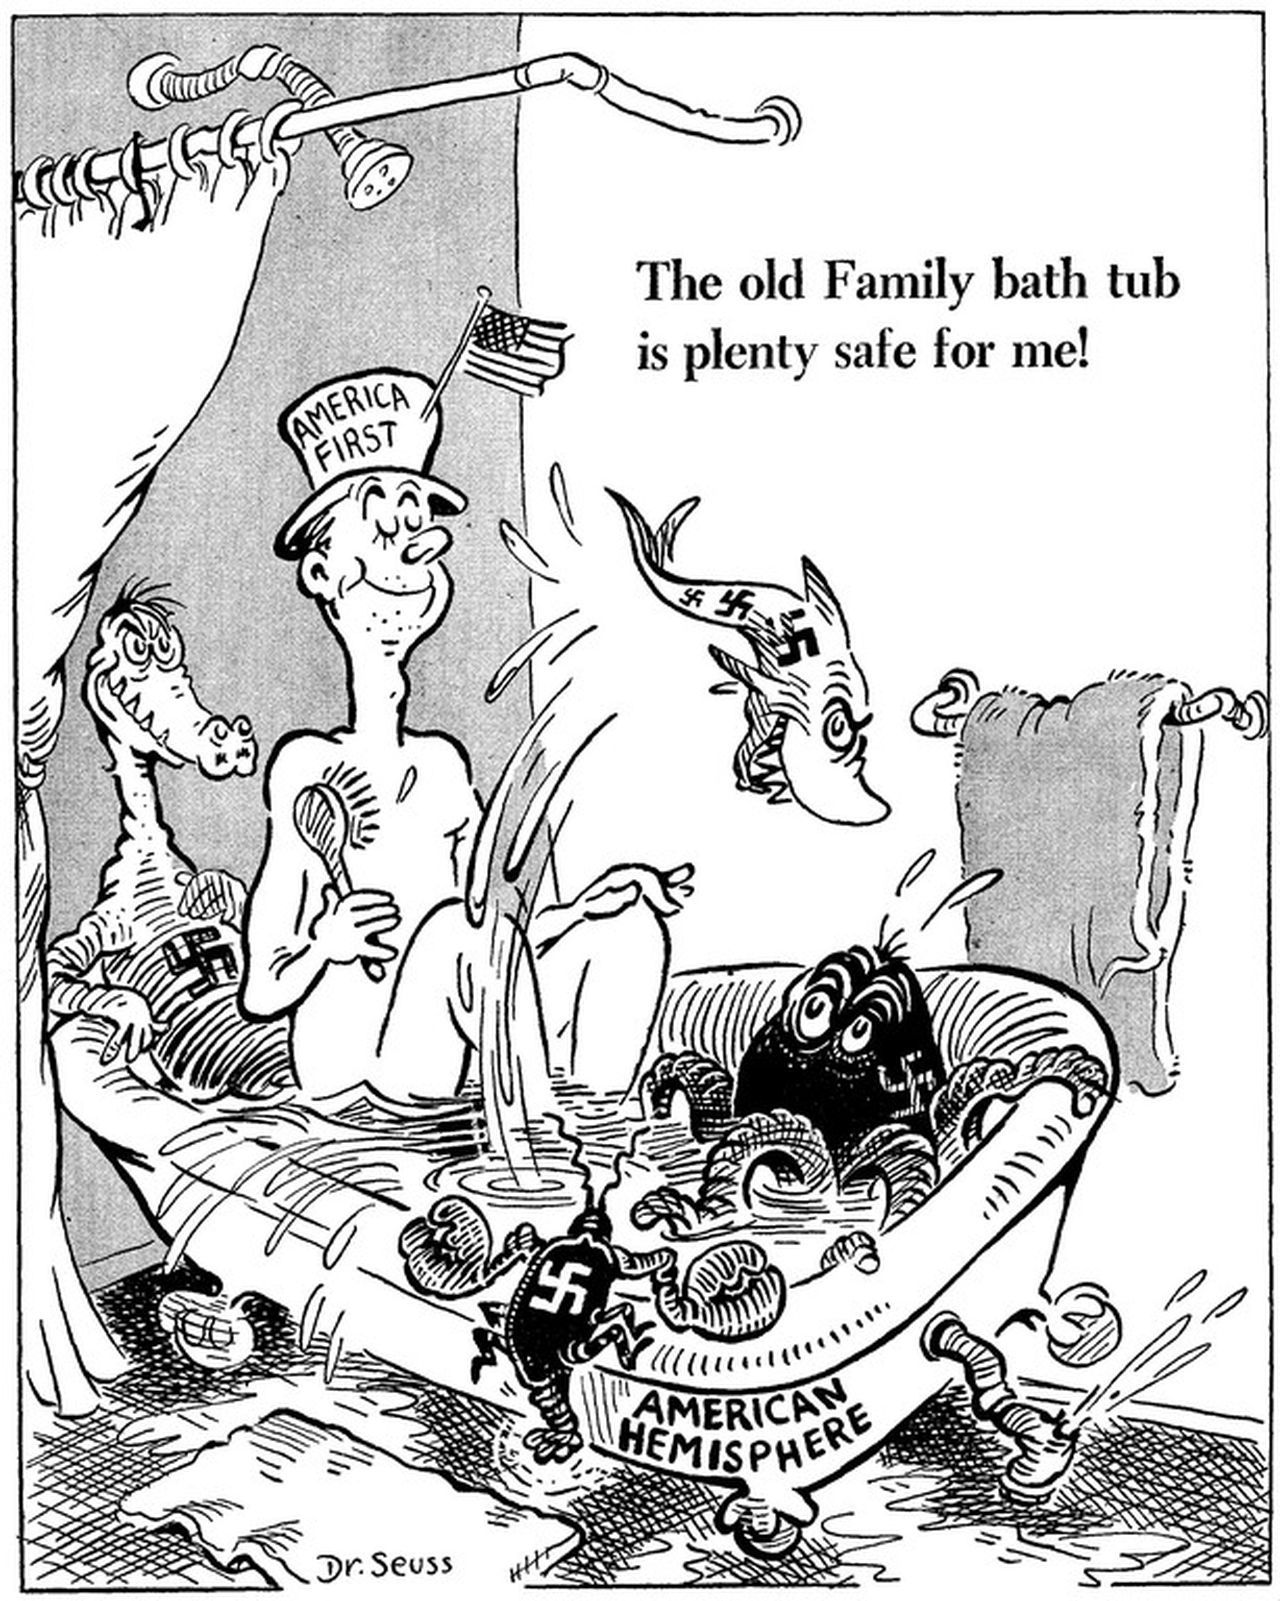 Dr. Seuss on America First 3